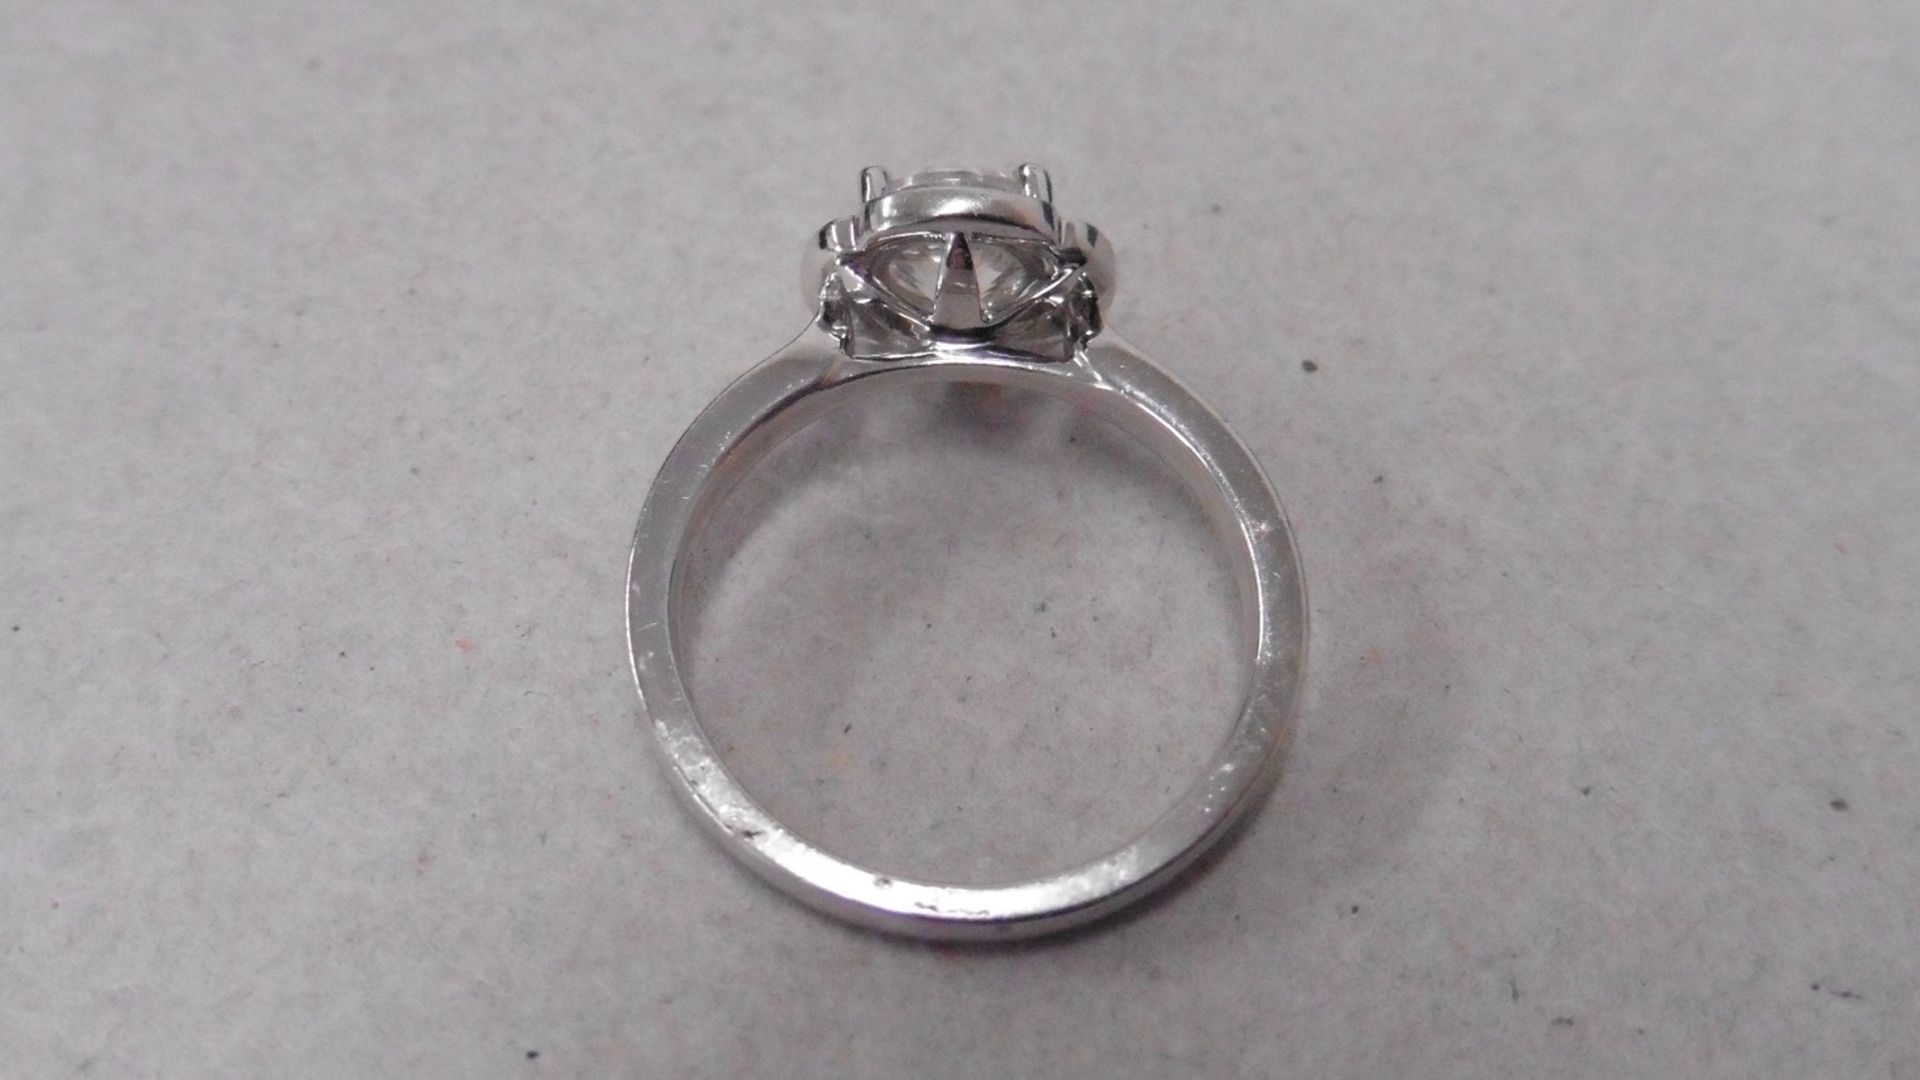 1.04ct diamond set soliatire ring in platinum. H colour and I1 clarity. Halo setting small - Image 2 of 3